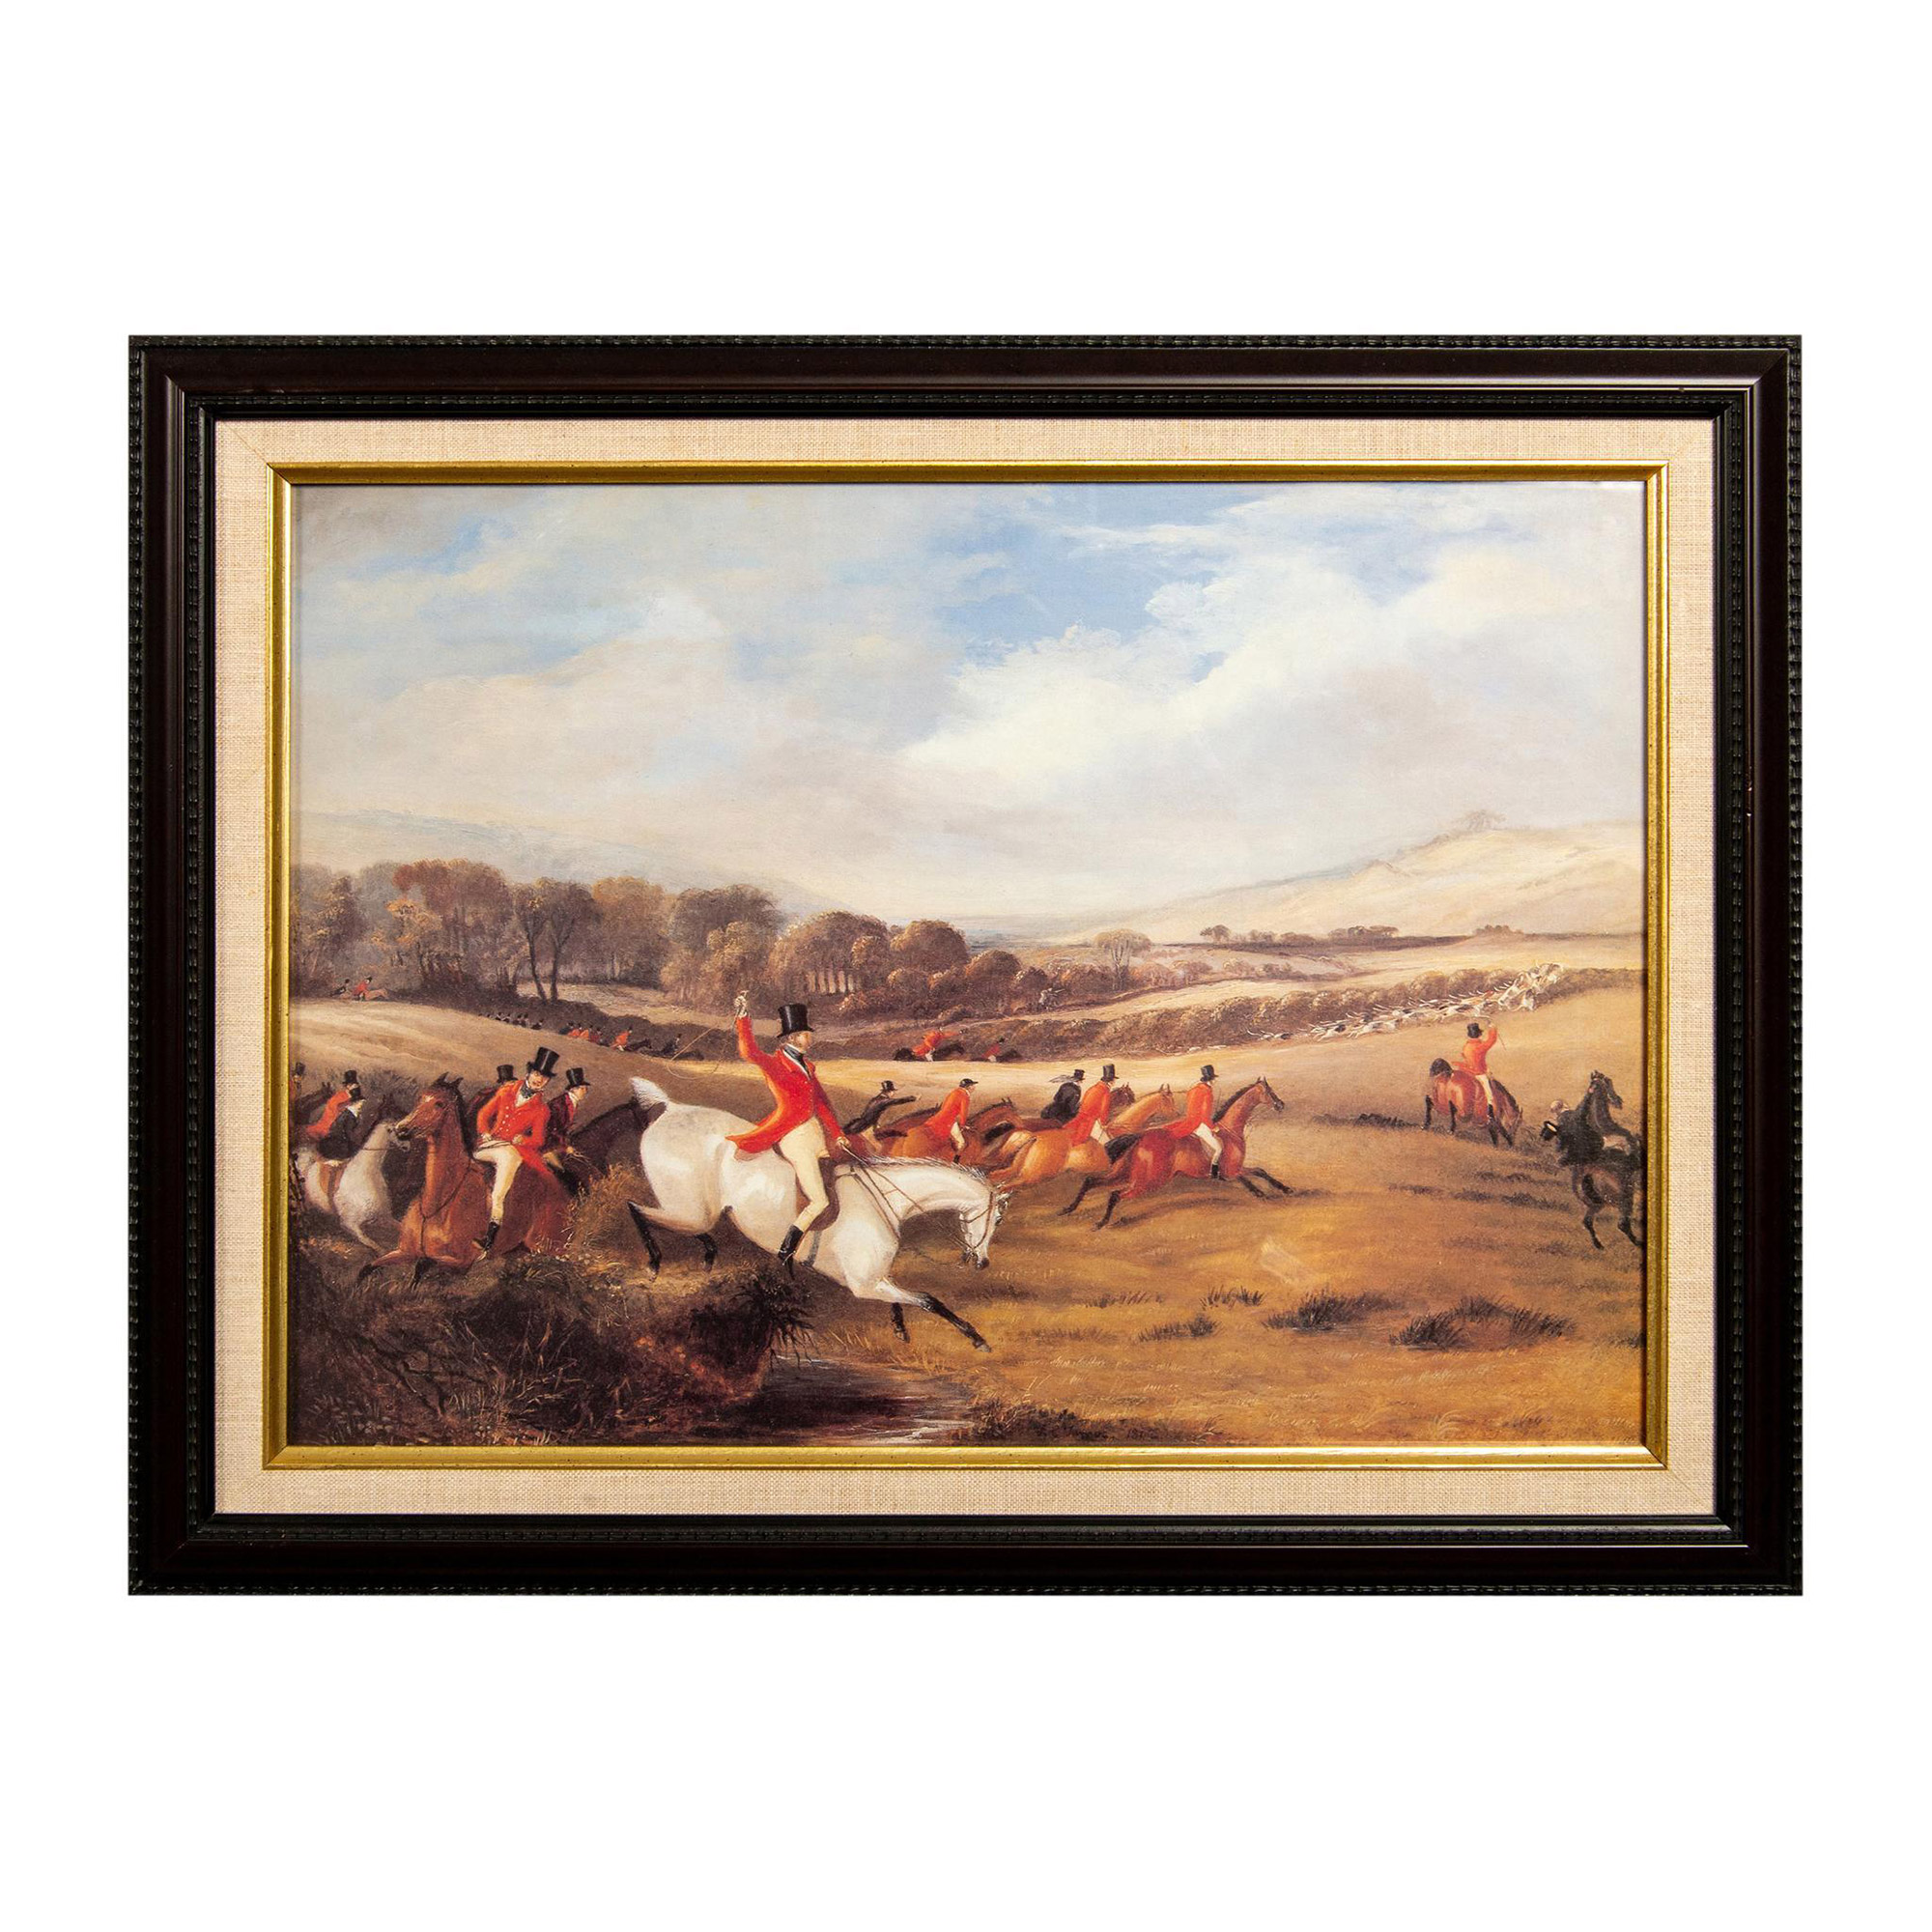 2pc Framed Equestrian Stag Hunting Prints - Image 2 of 9